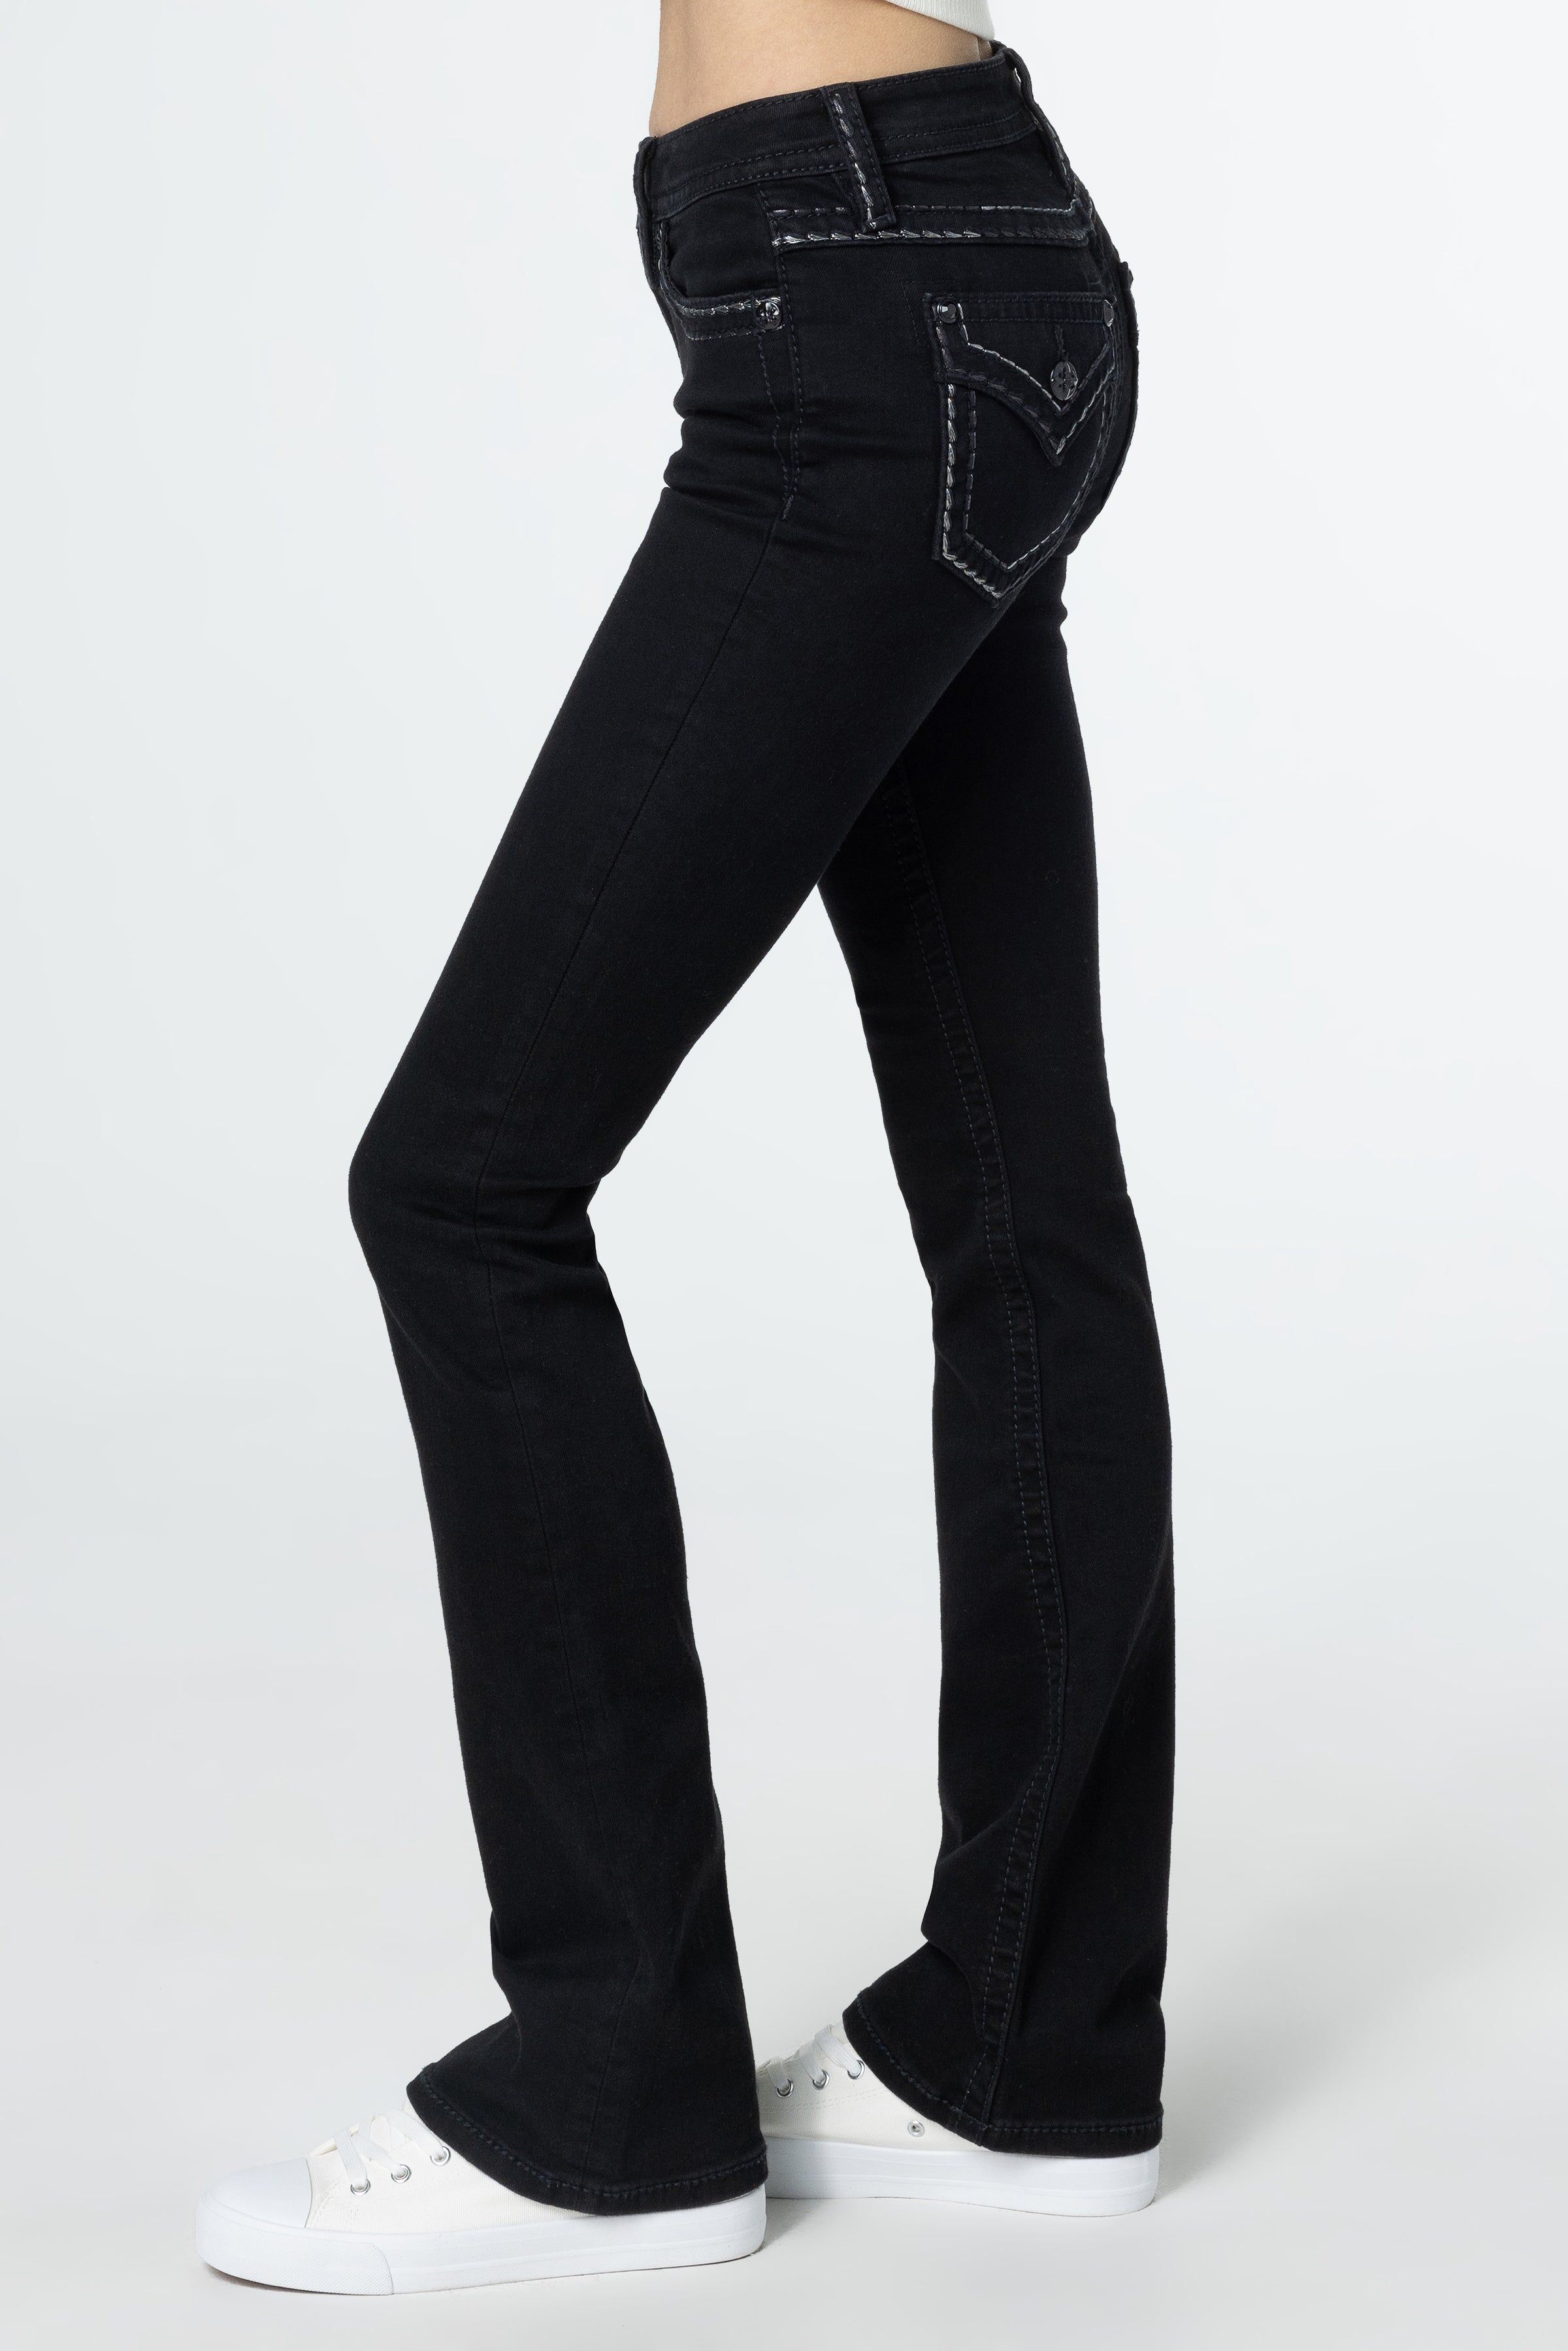 Silver Metallic Classic Black Bootcut Jeans | Only $119.00